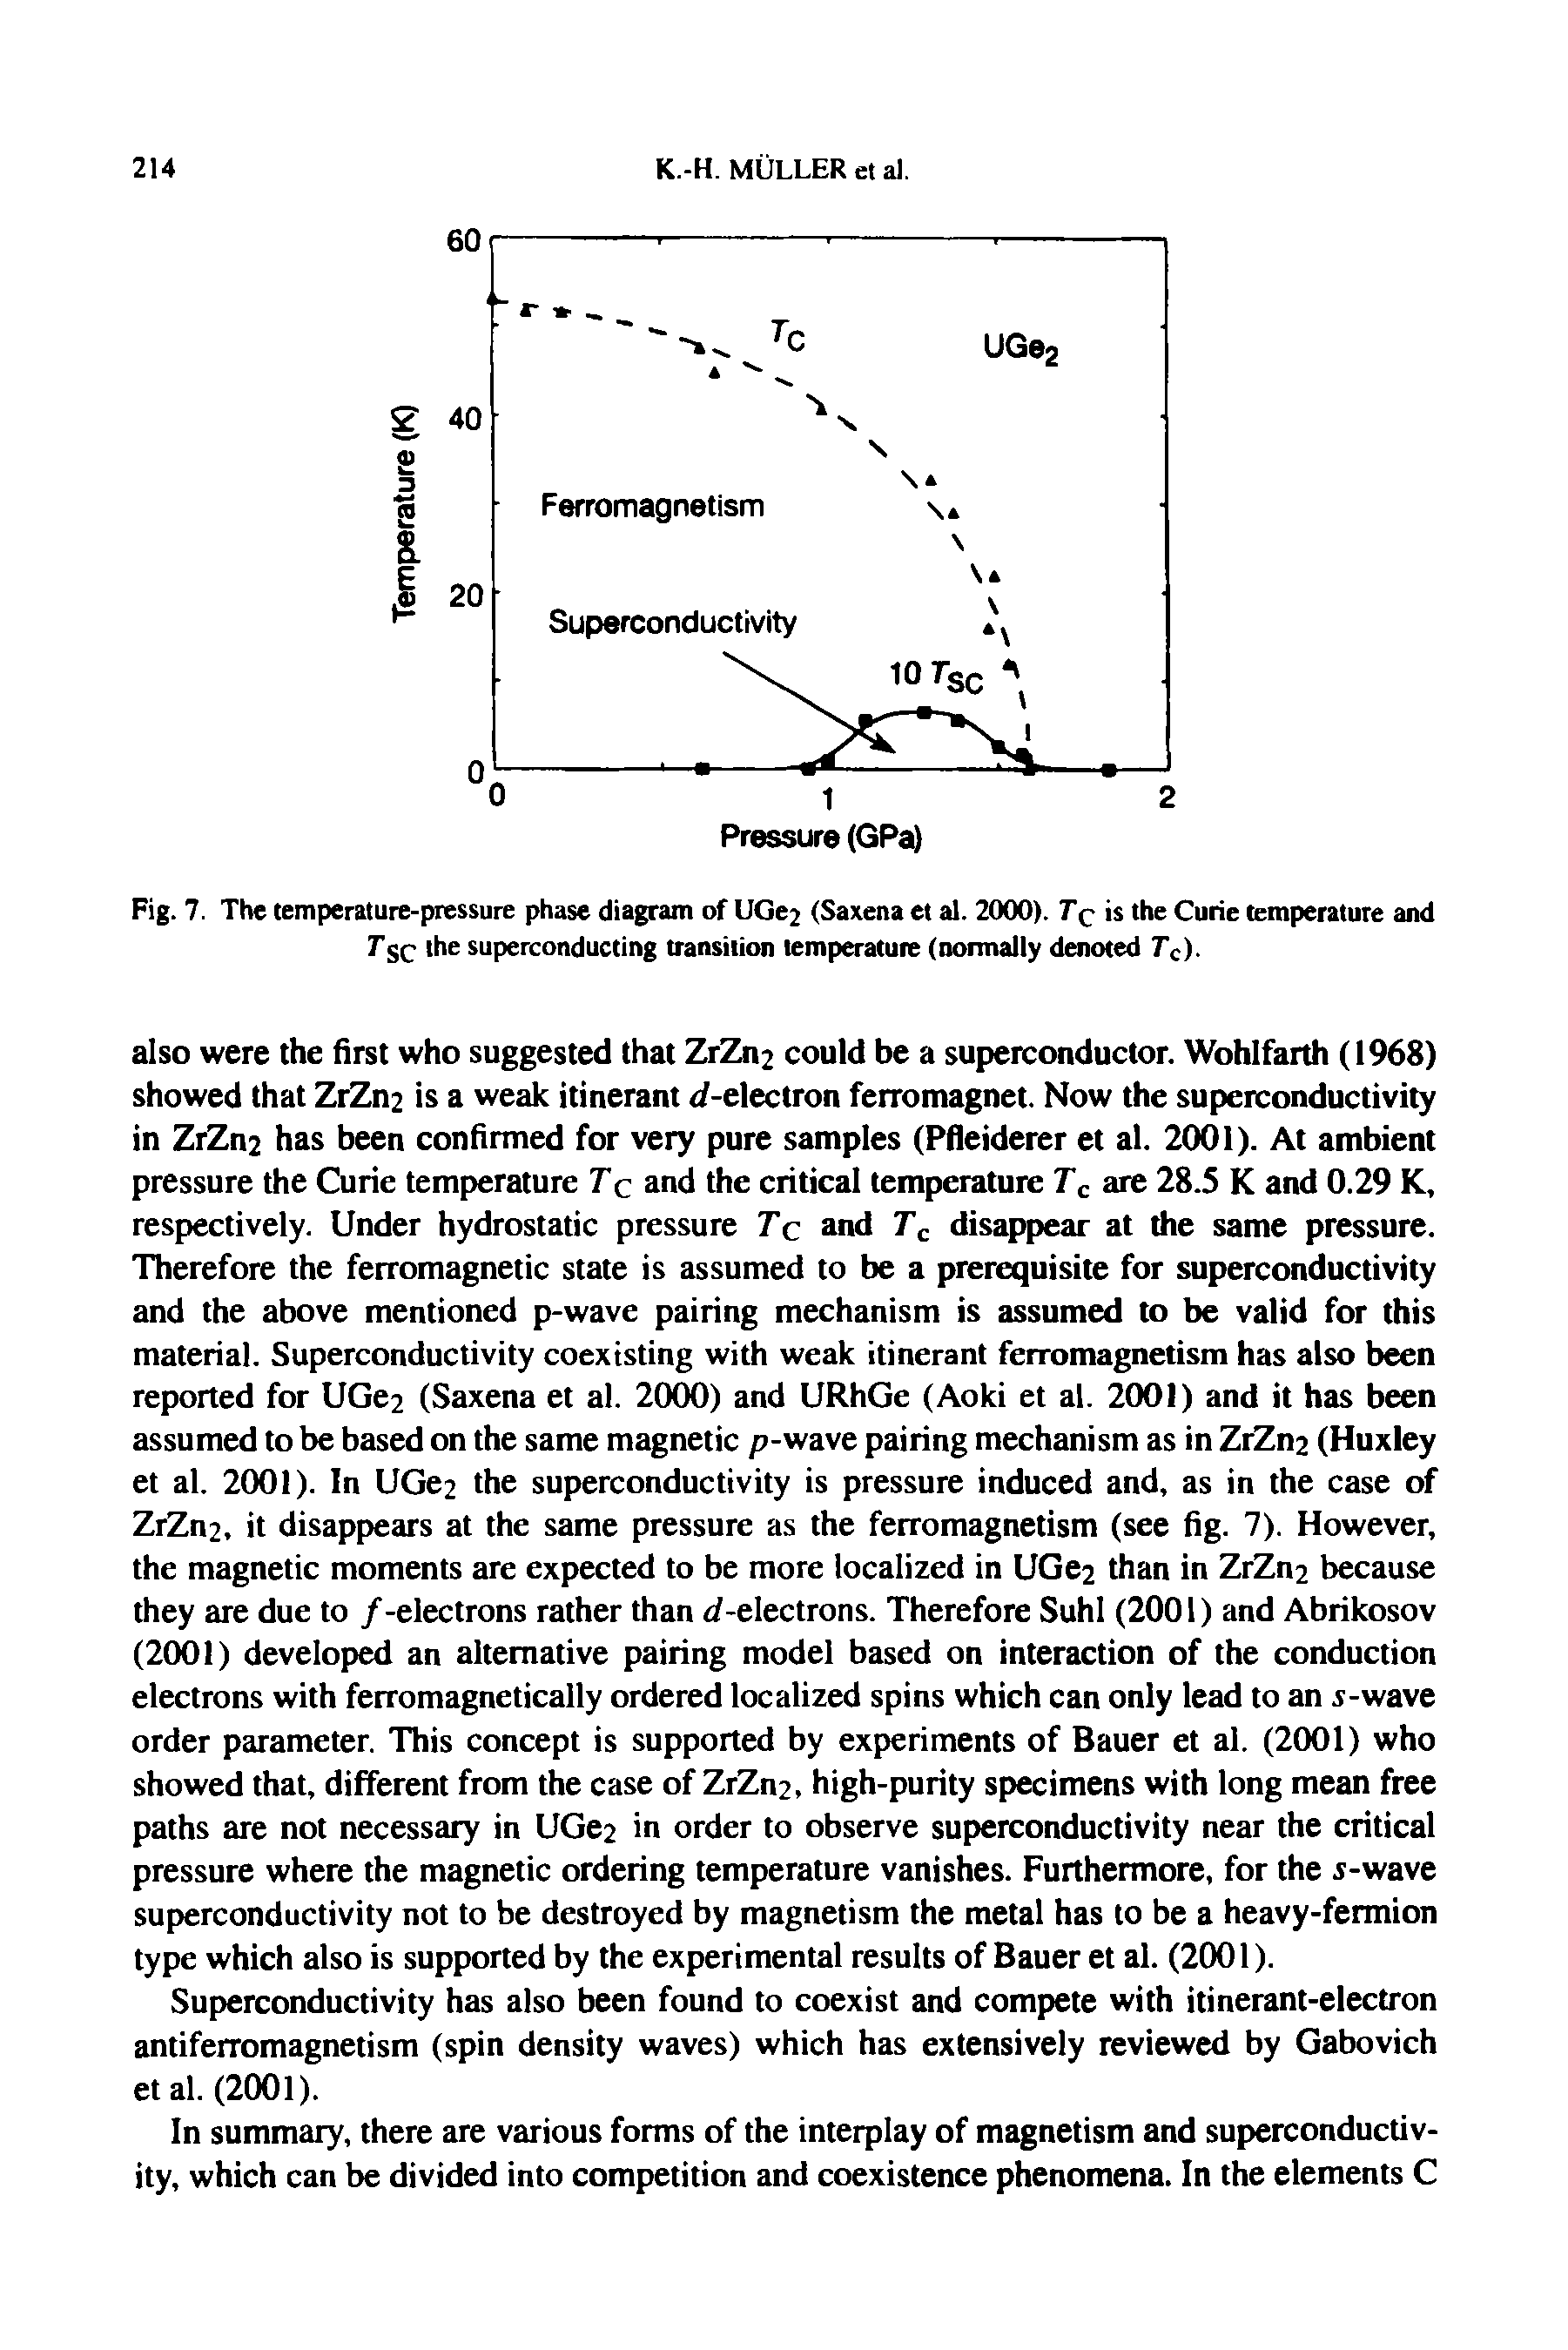 Fig. 7. The temperature-pressure phase diagram of UGe2 (Saxena et al. 2000). Tq is the Curie temperature and Tgc the superconducting transition temperature (normally denoted Tc).